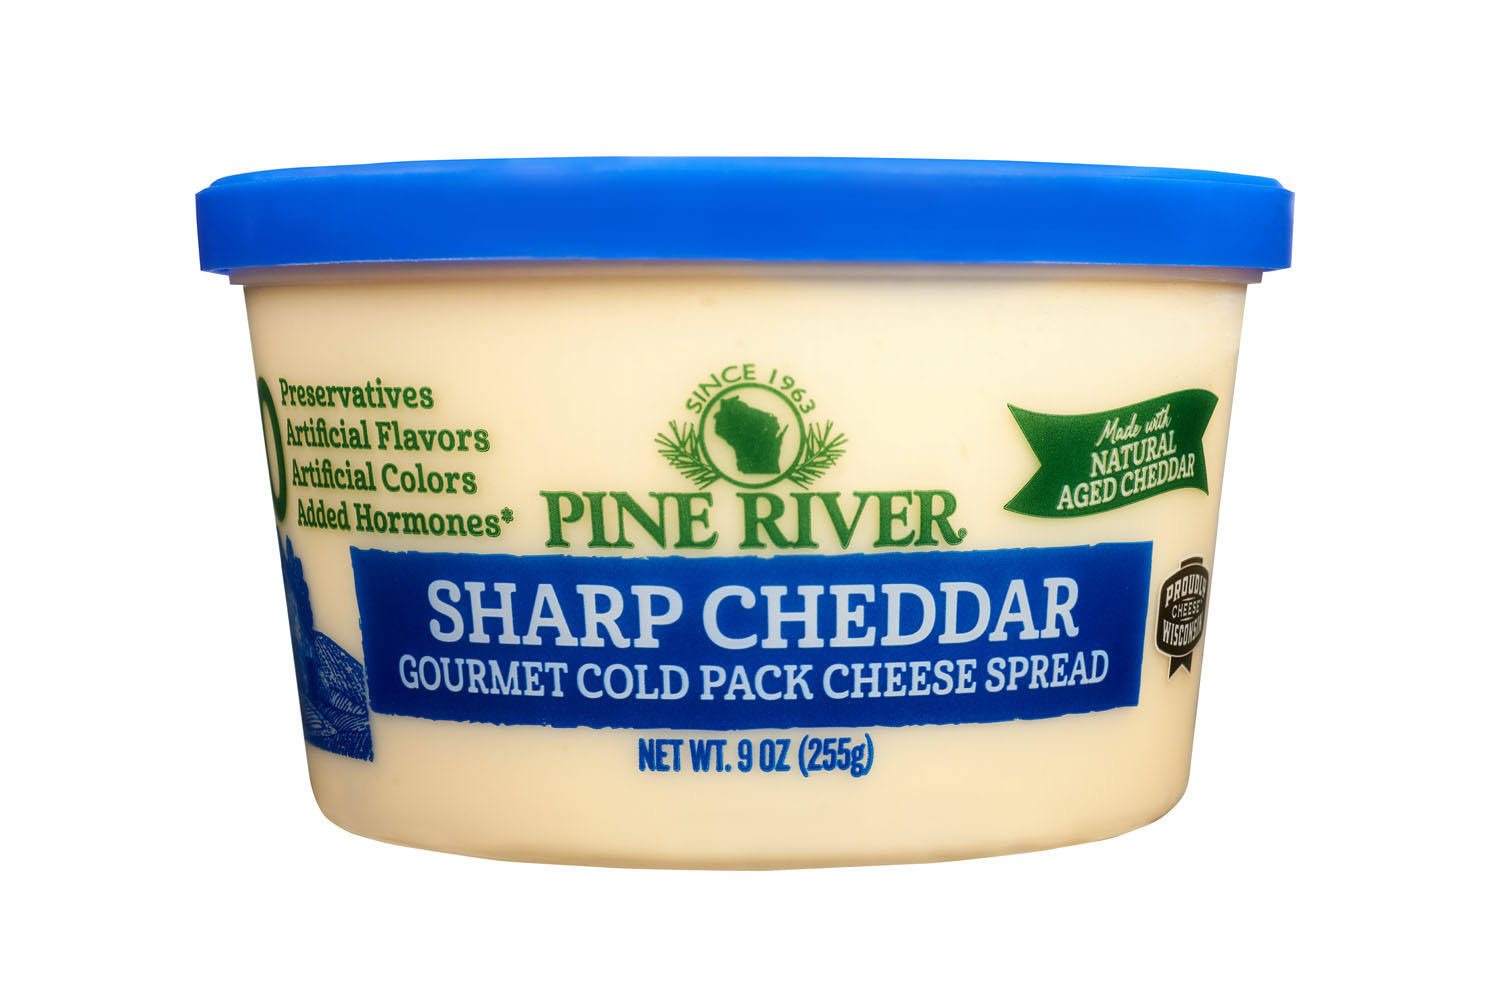 Pine River Sharp Cheddar Gourmet Cold Pack Cheese Spread - 9 oz